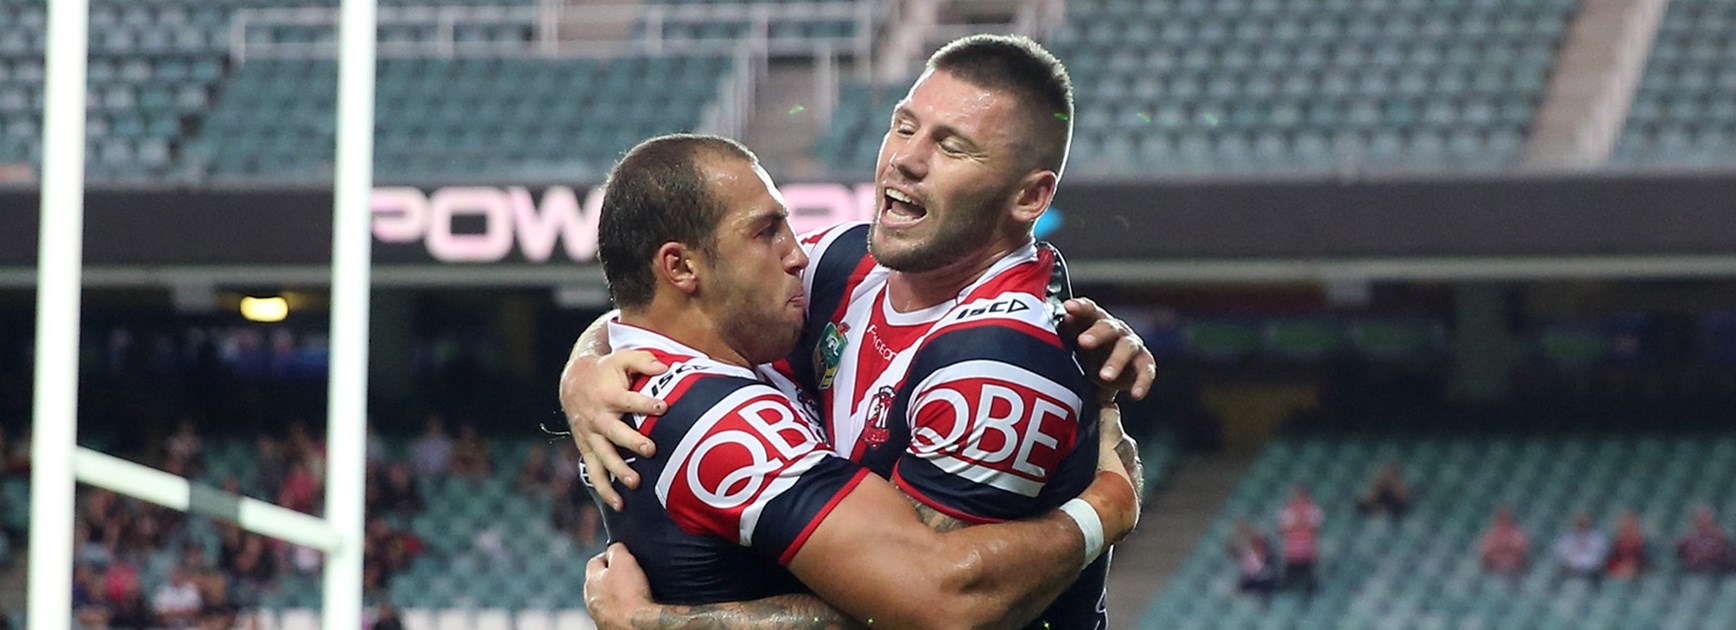 Blake Ferguson is looking forward to building his combination with Shaun Kenny-Dowall.